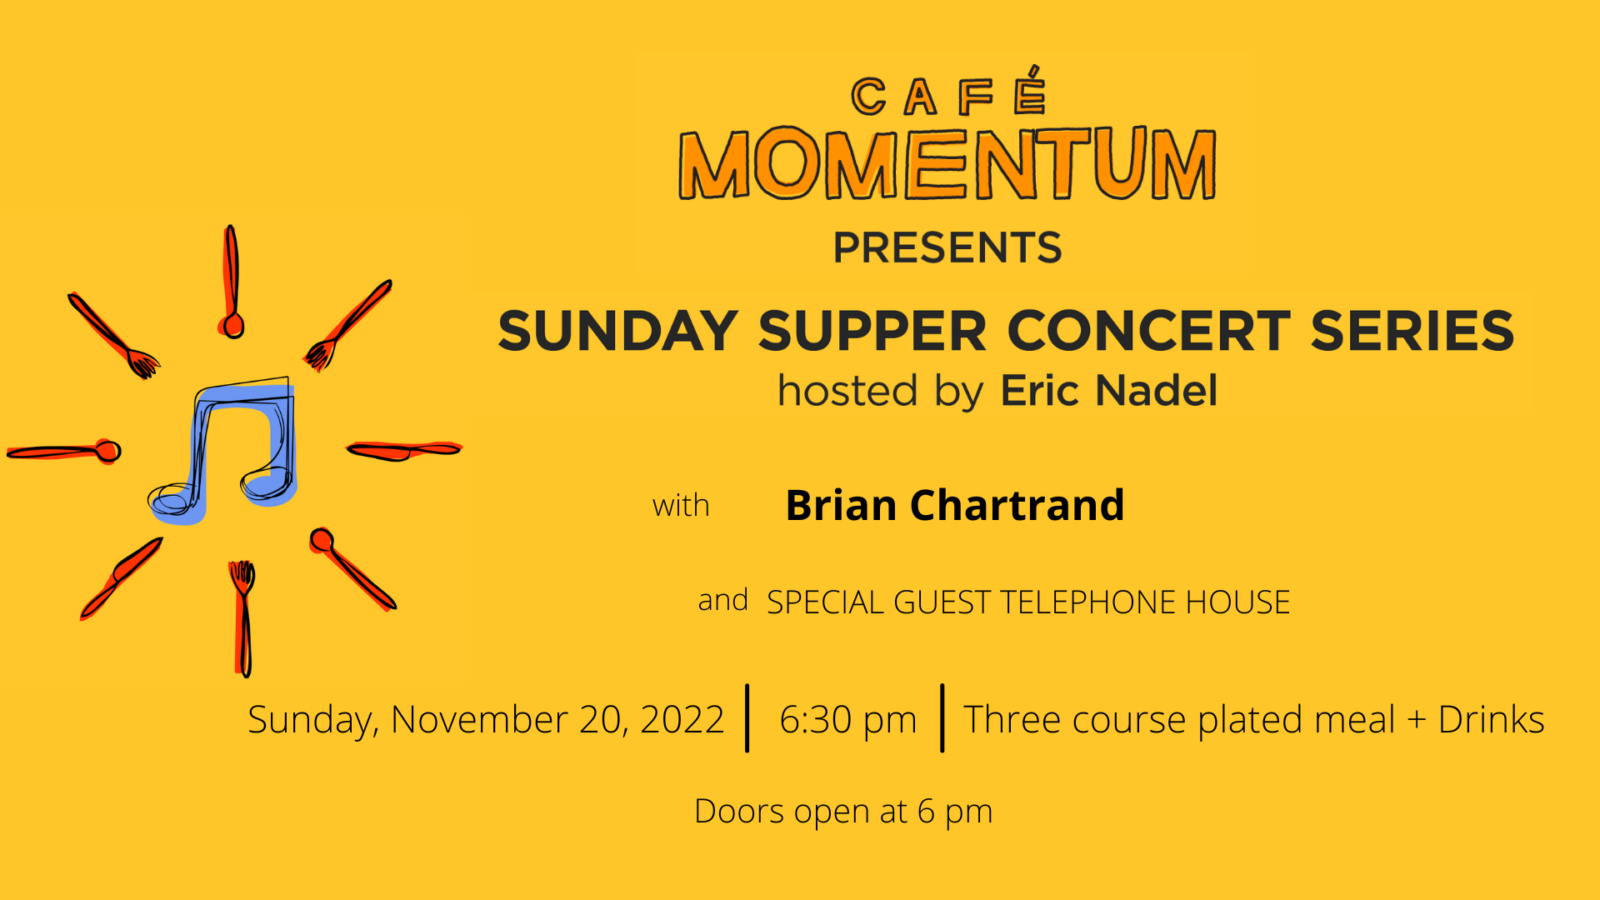 Sunday Supper Concert Series with Brian Chartrand